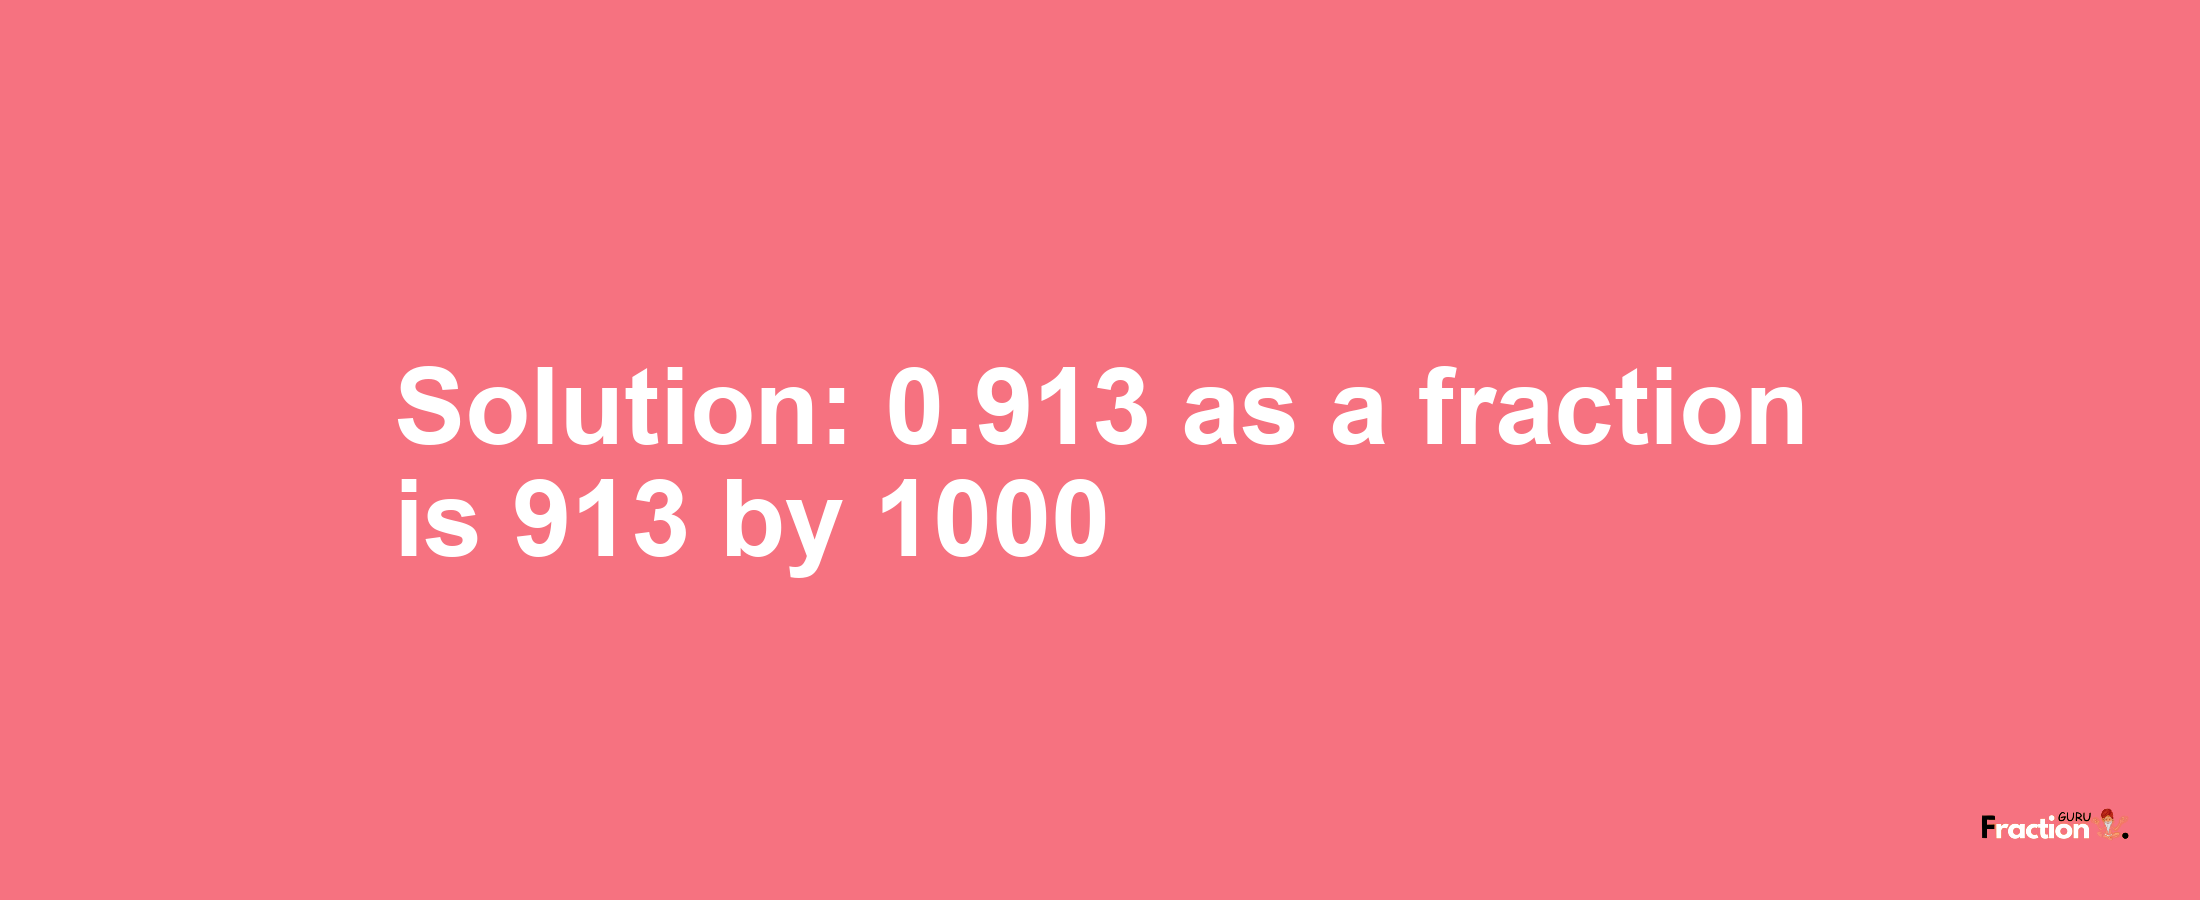 Solution:0.913 as a fraction is 913/1000